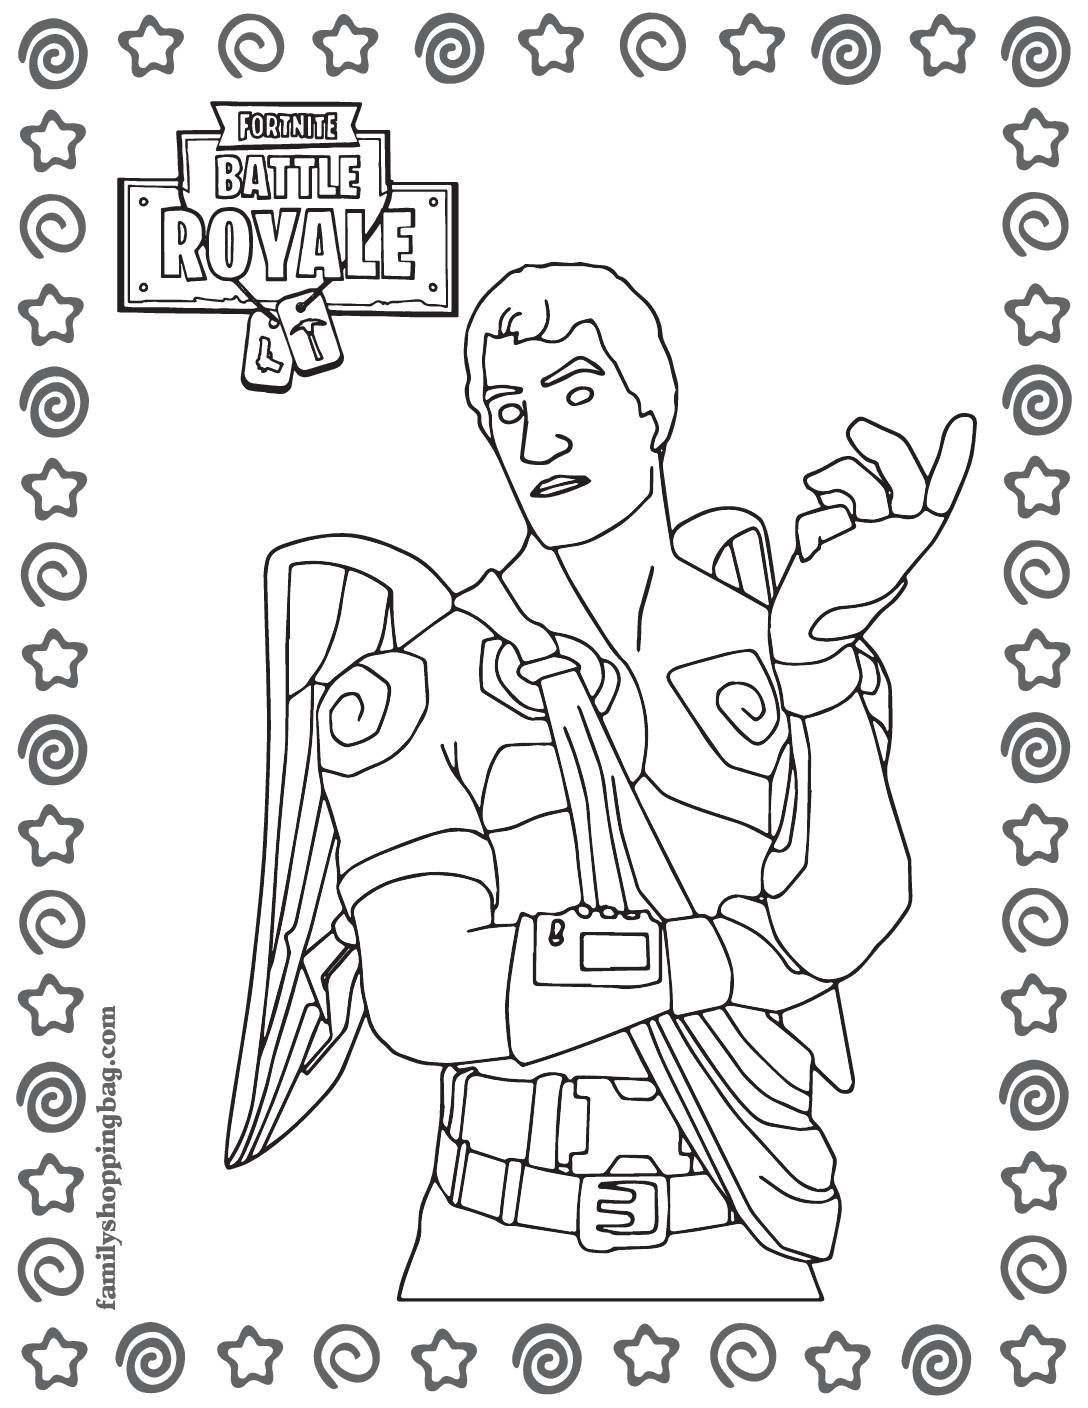 Coloring Page 5 Fortnite Coloring Pages